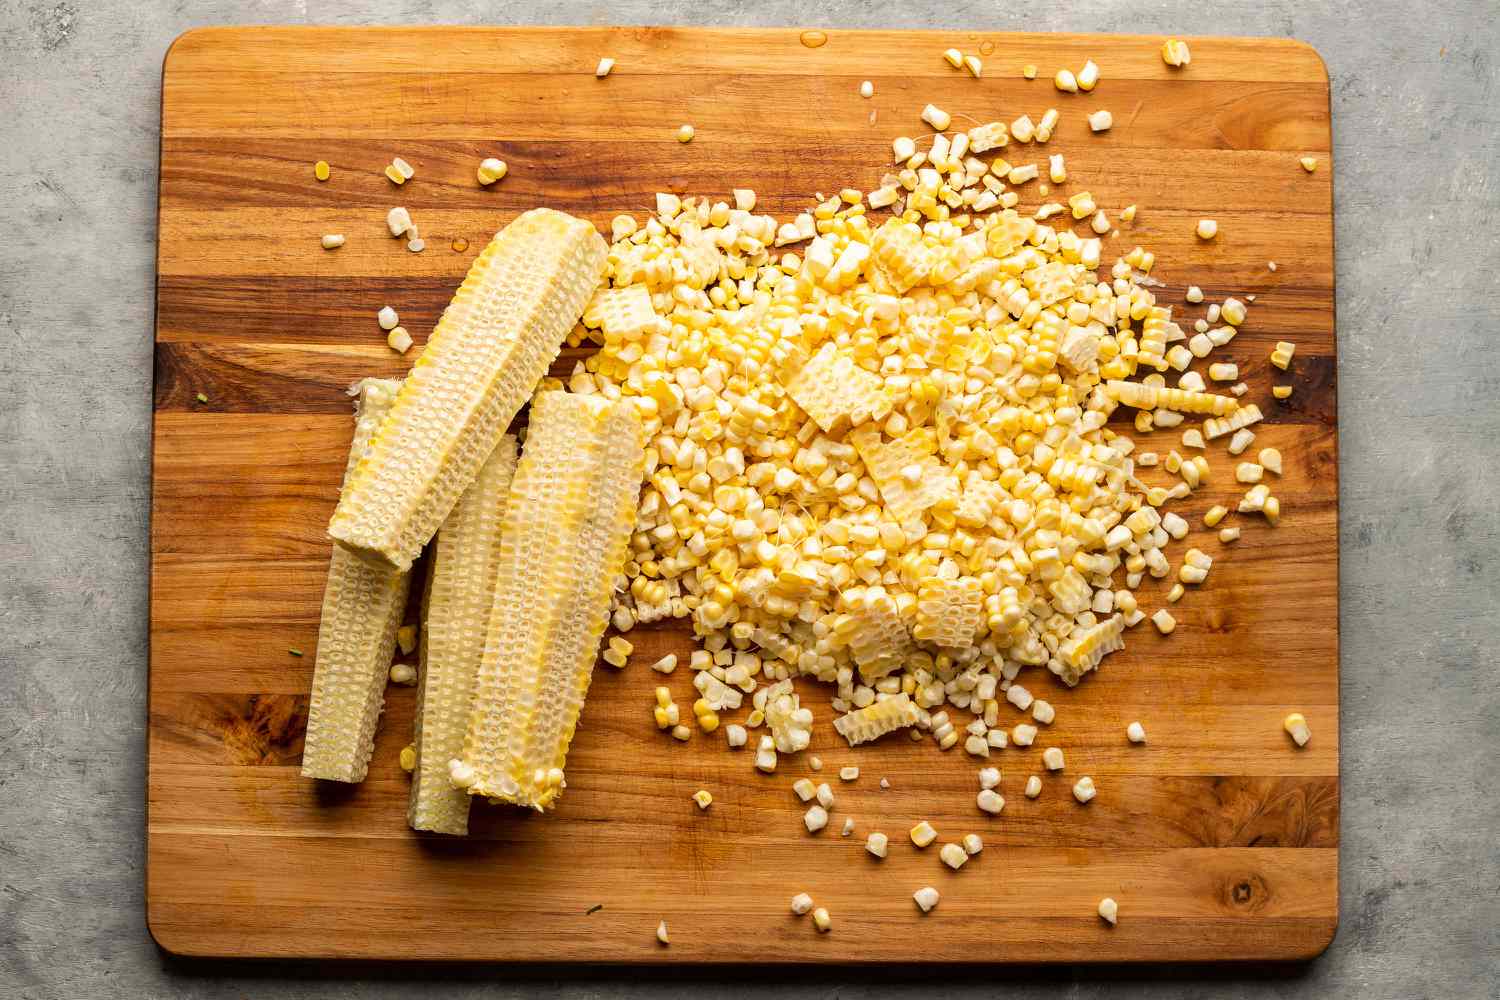 Cut the kernels off the corn cobs on the cutting board 